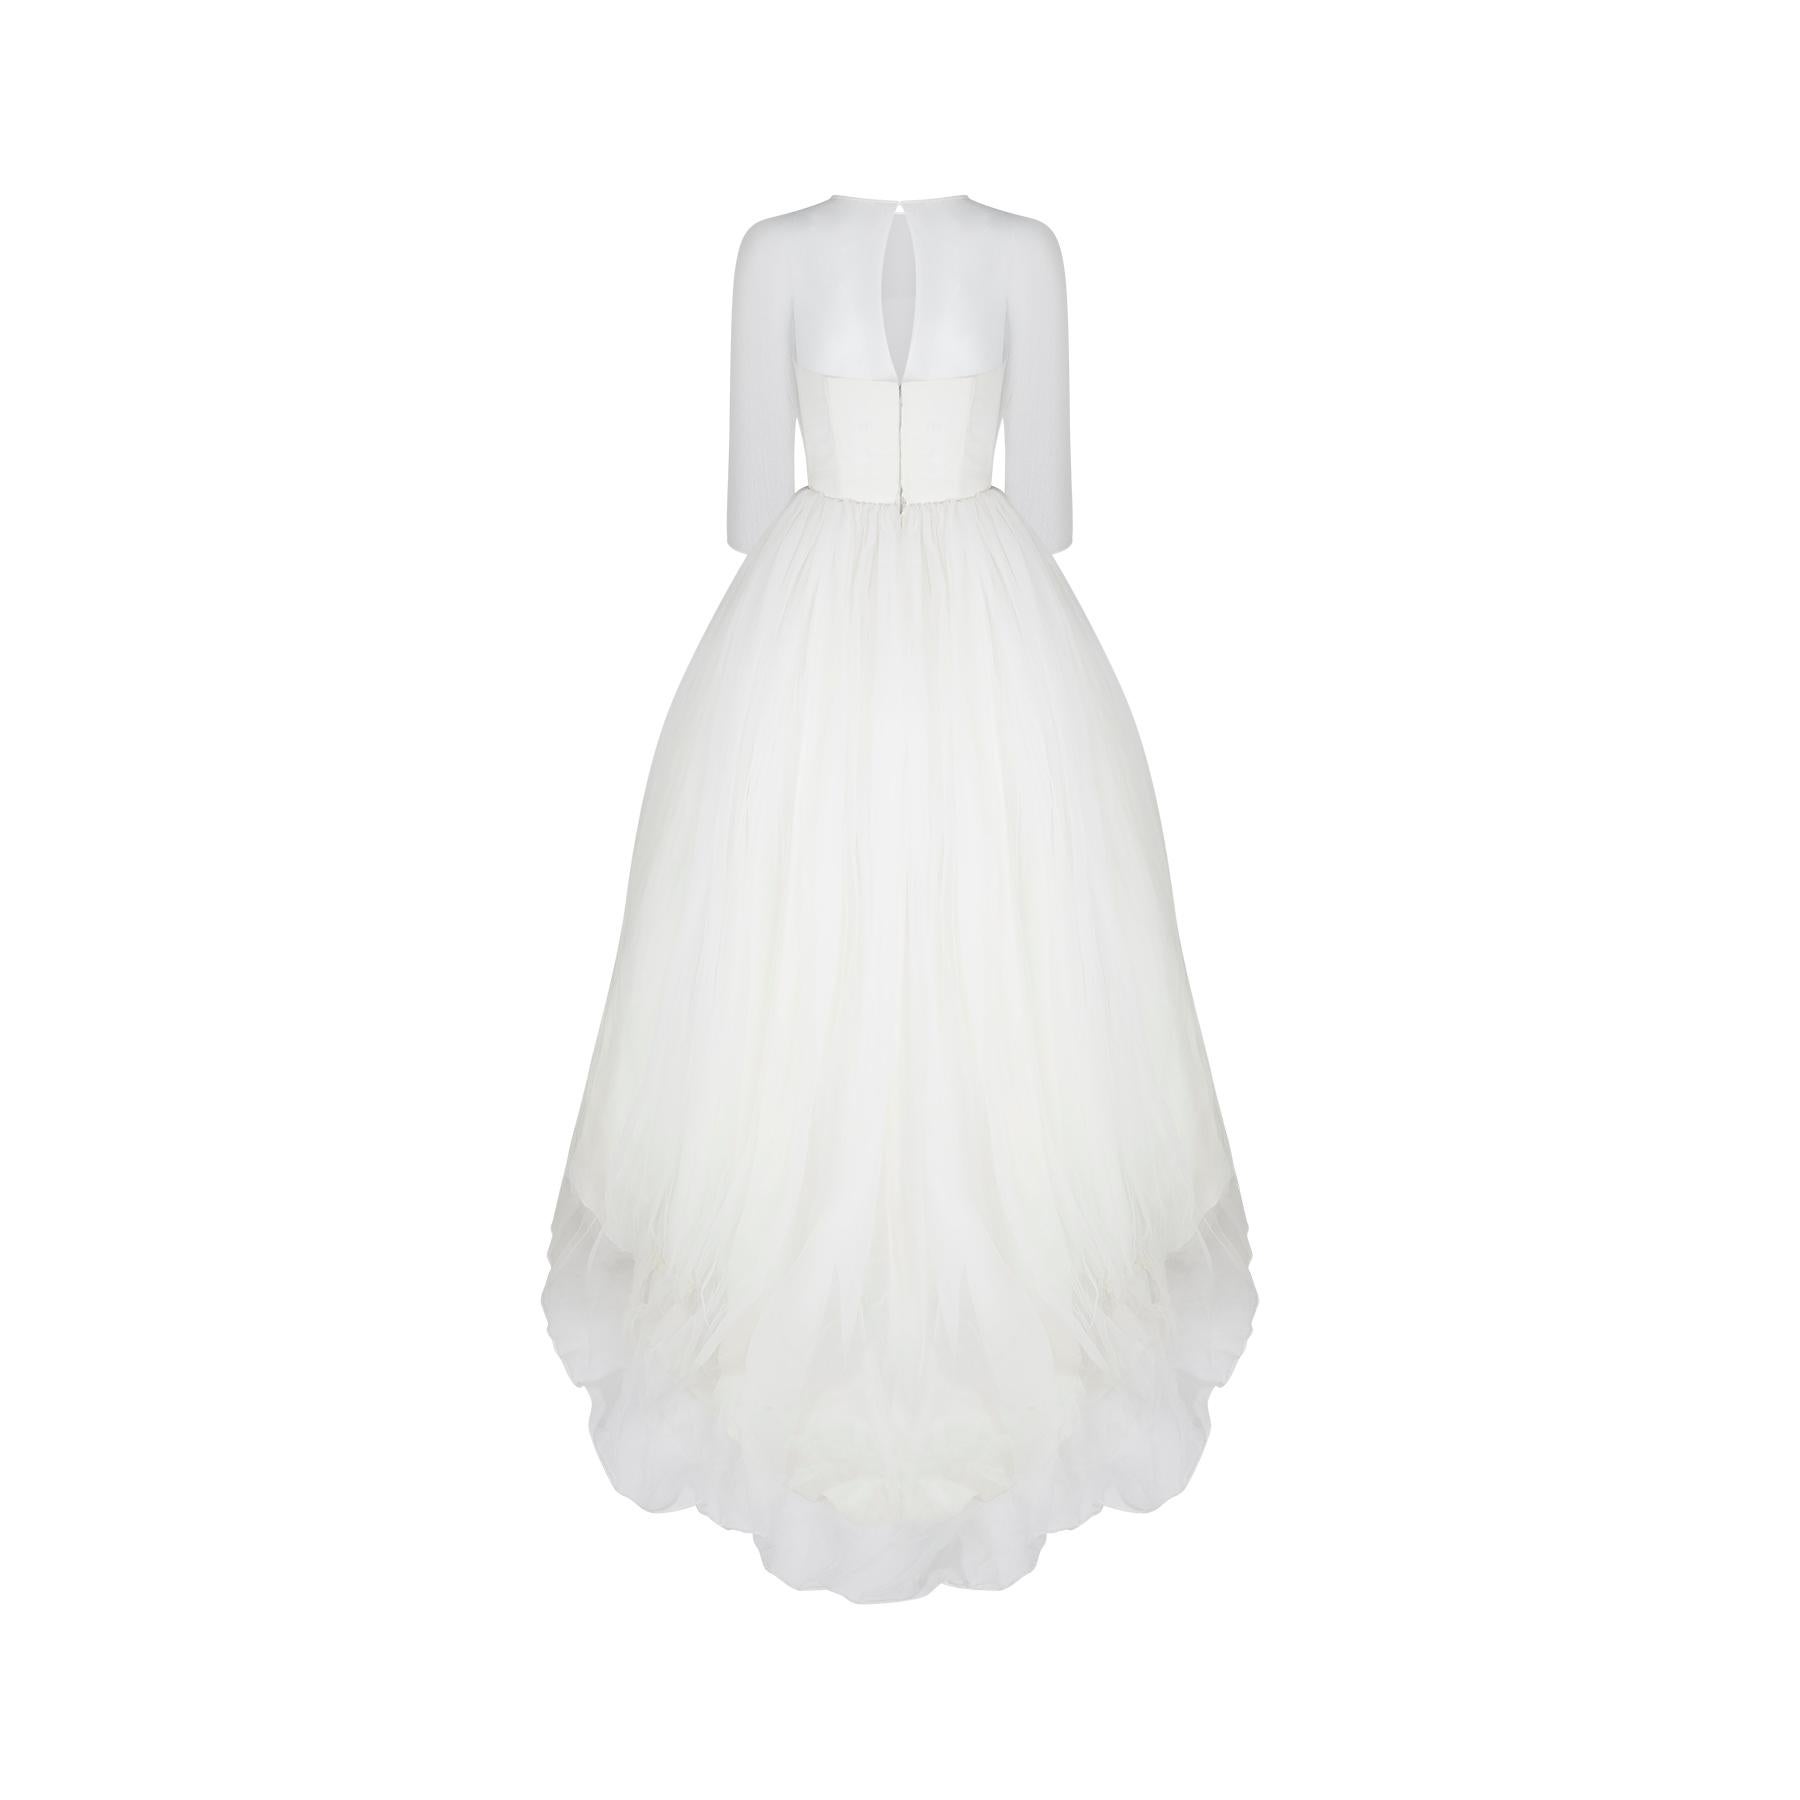 This late 1950s to early 1960s wedding dress is a rare thing.  It is the earliest wedding dress and indeed the earliest item we've ever seen from designer Jean Varon who founded his own label in 1959.  It is the classic archetypal layered wedding